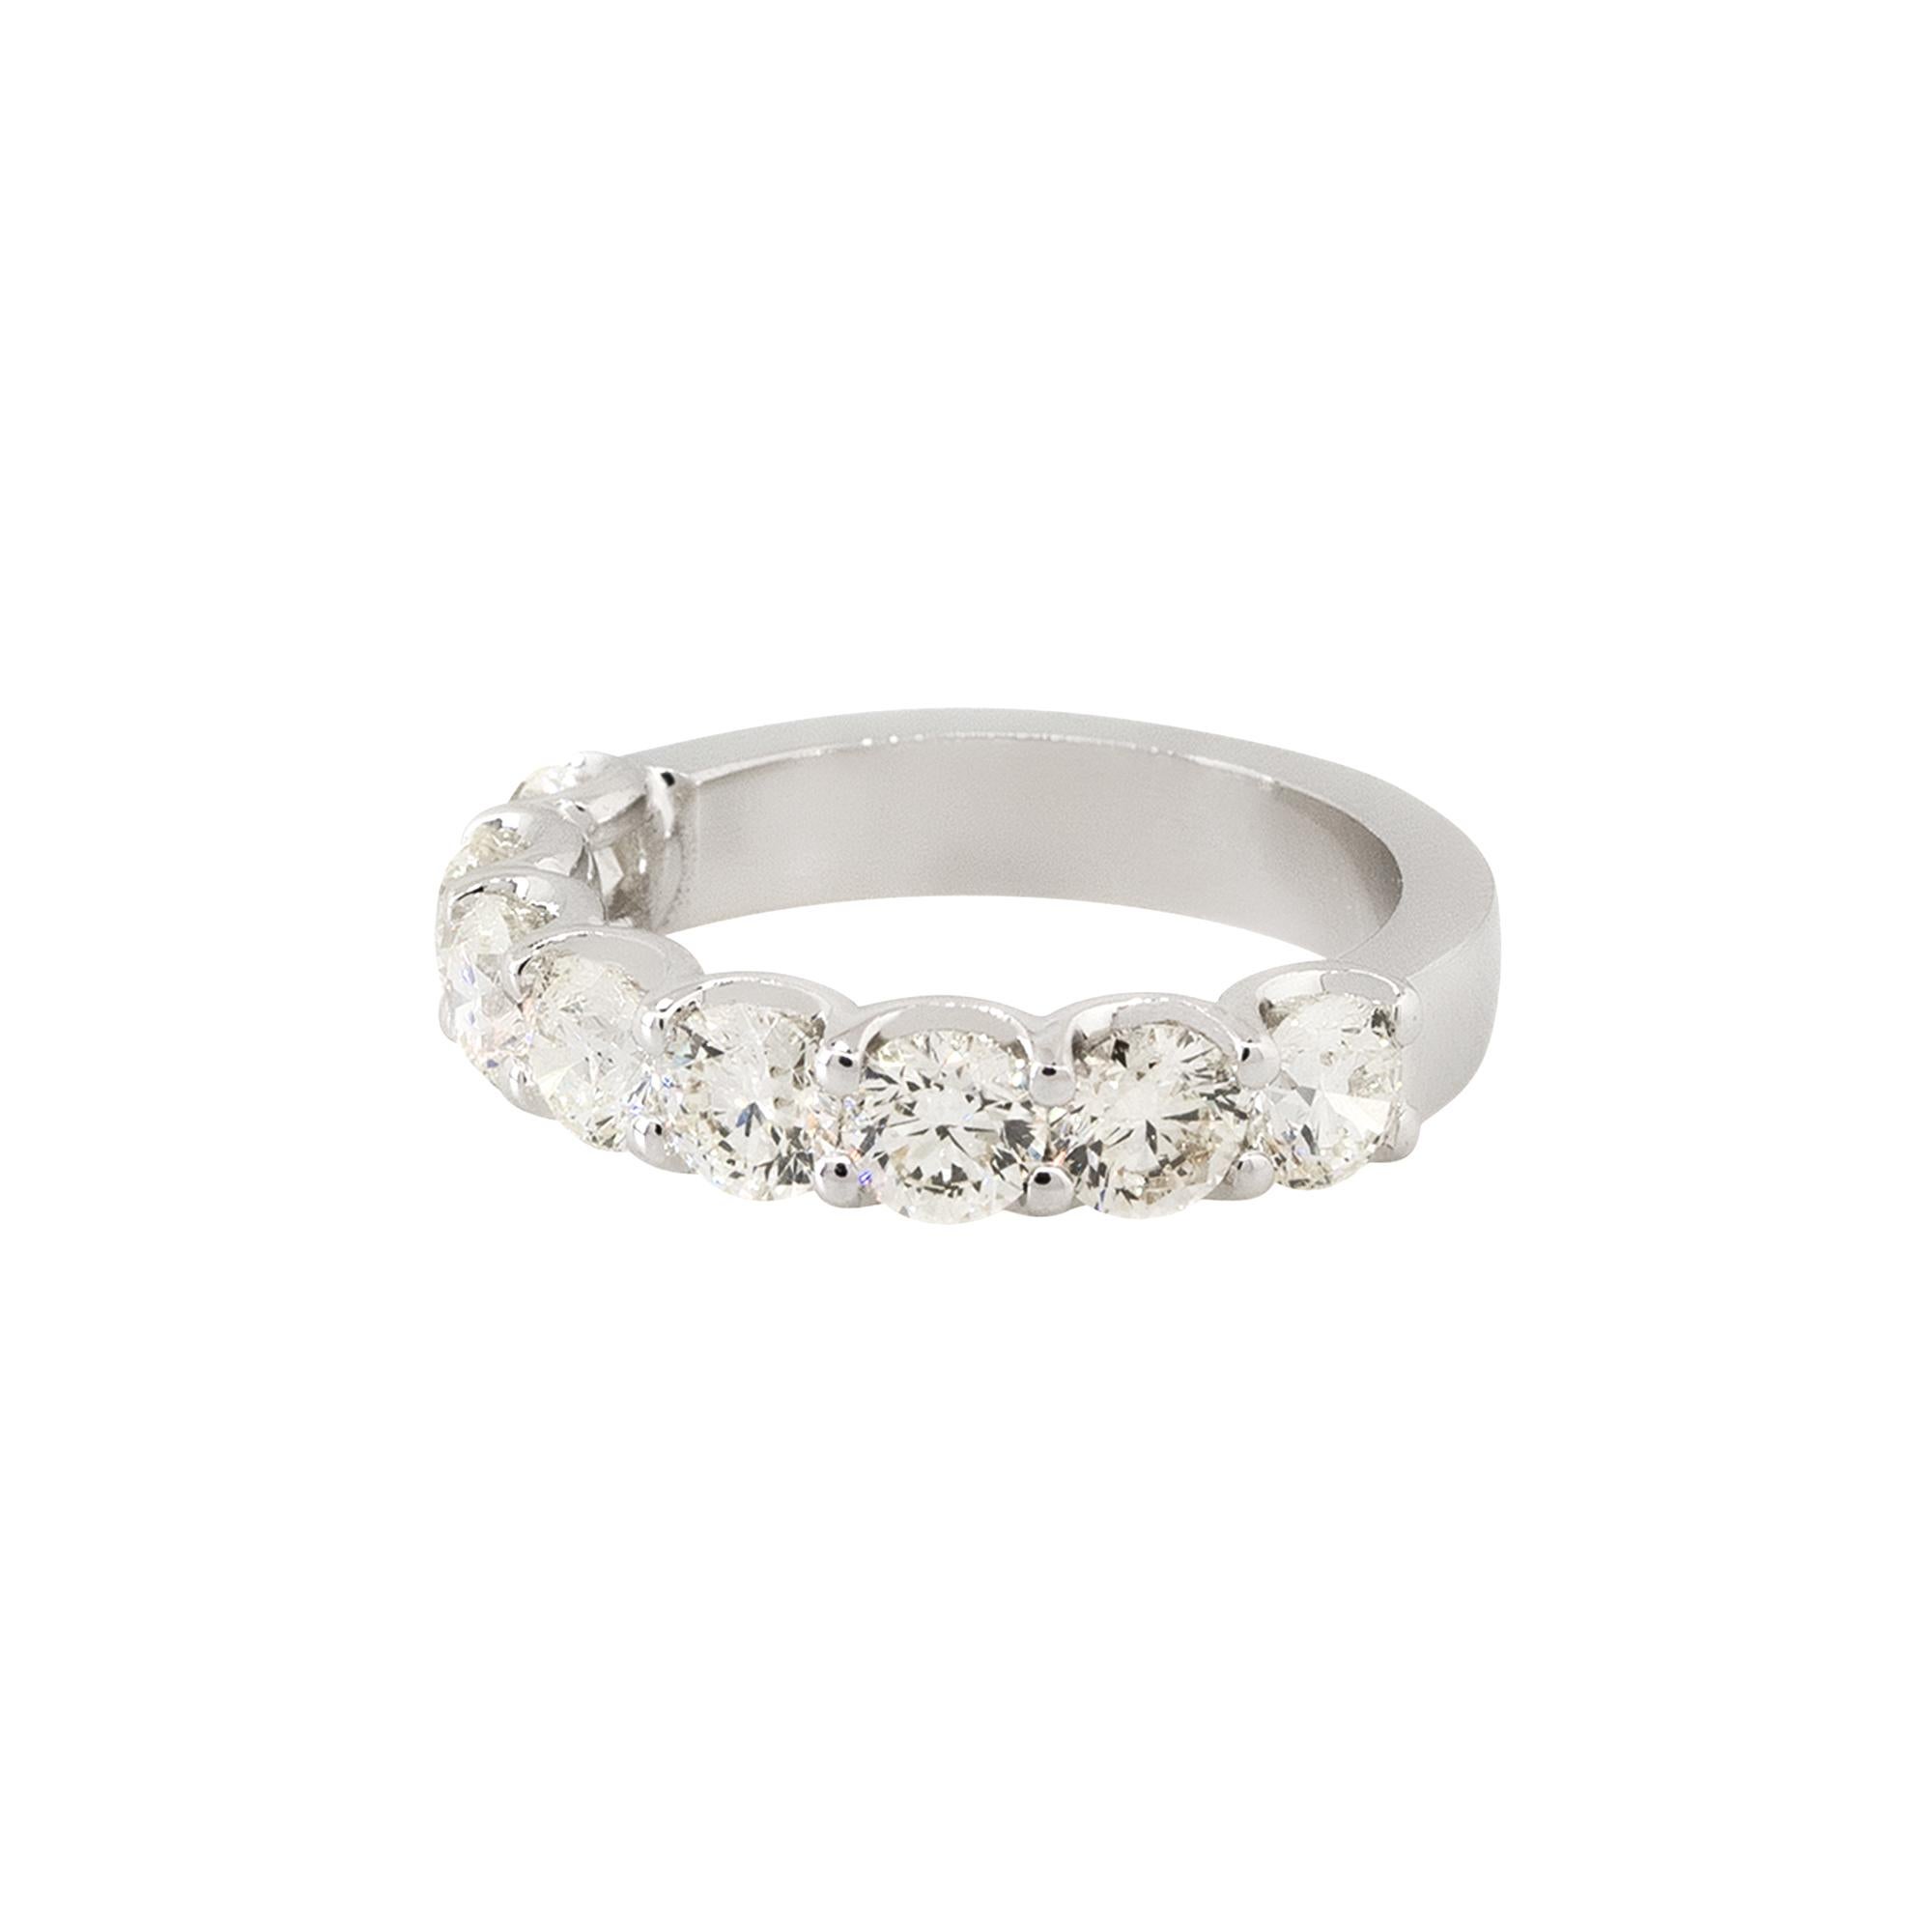 18k White Gold 2.43ctw Diamond Halfway Eternity Ring

Material: 18k White Gold
Diamond Details: Approximately 2.43cts of Round Brilliant Cut Diamonds. All diamonds are prong set and there are 8 Diamonds total. Diamonds are G/H in Color and VS in